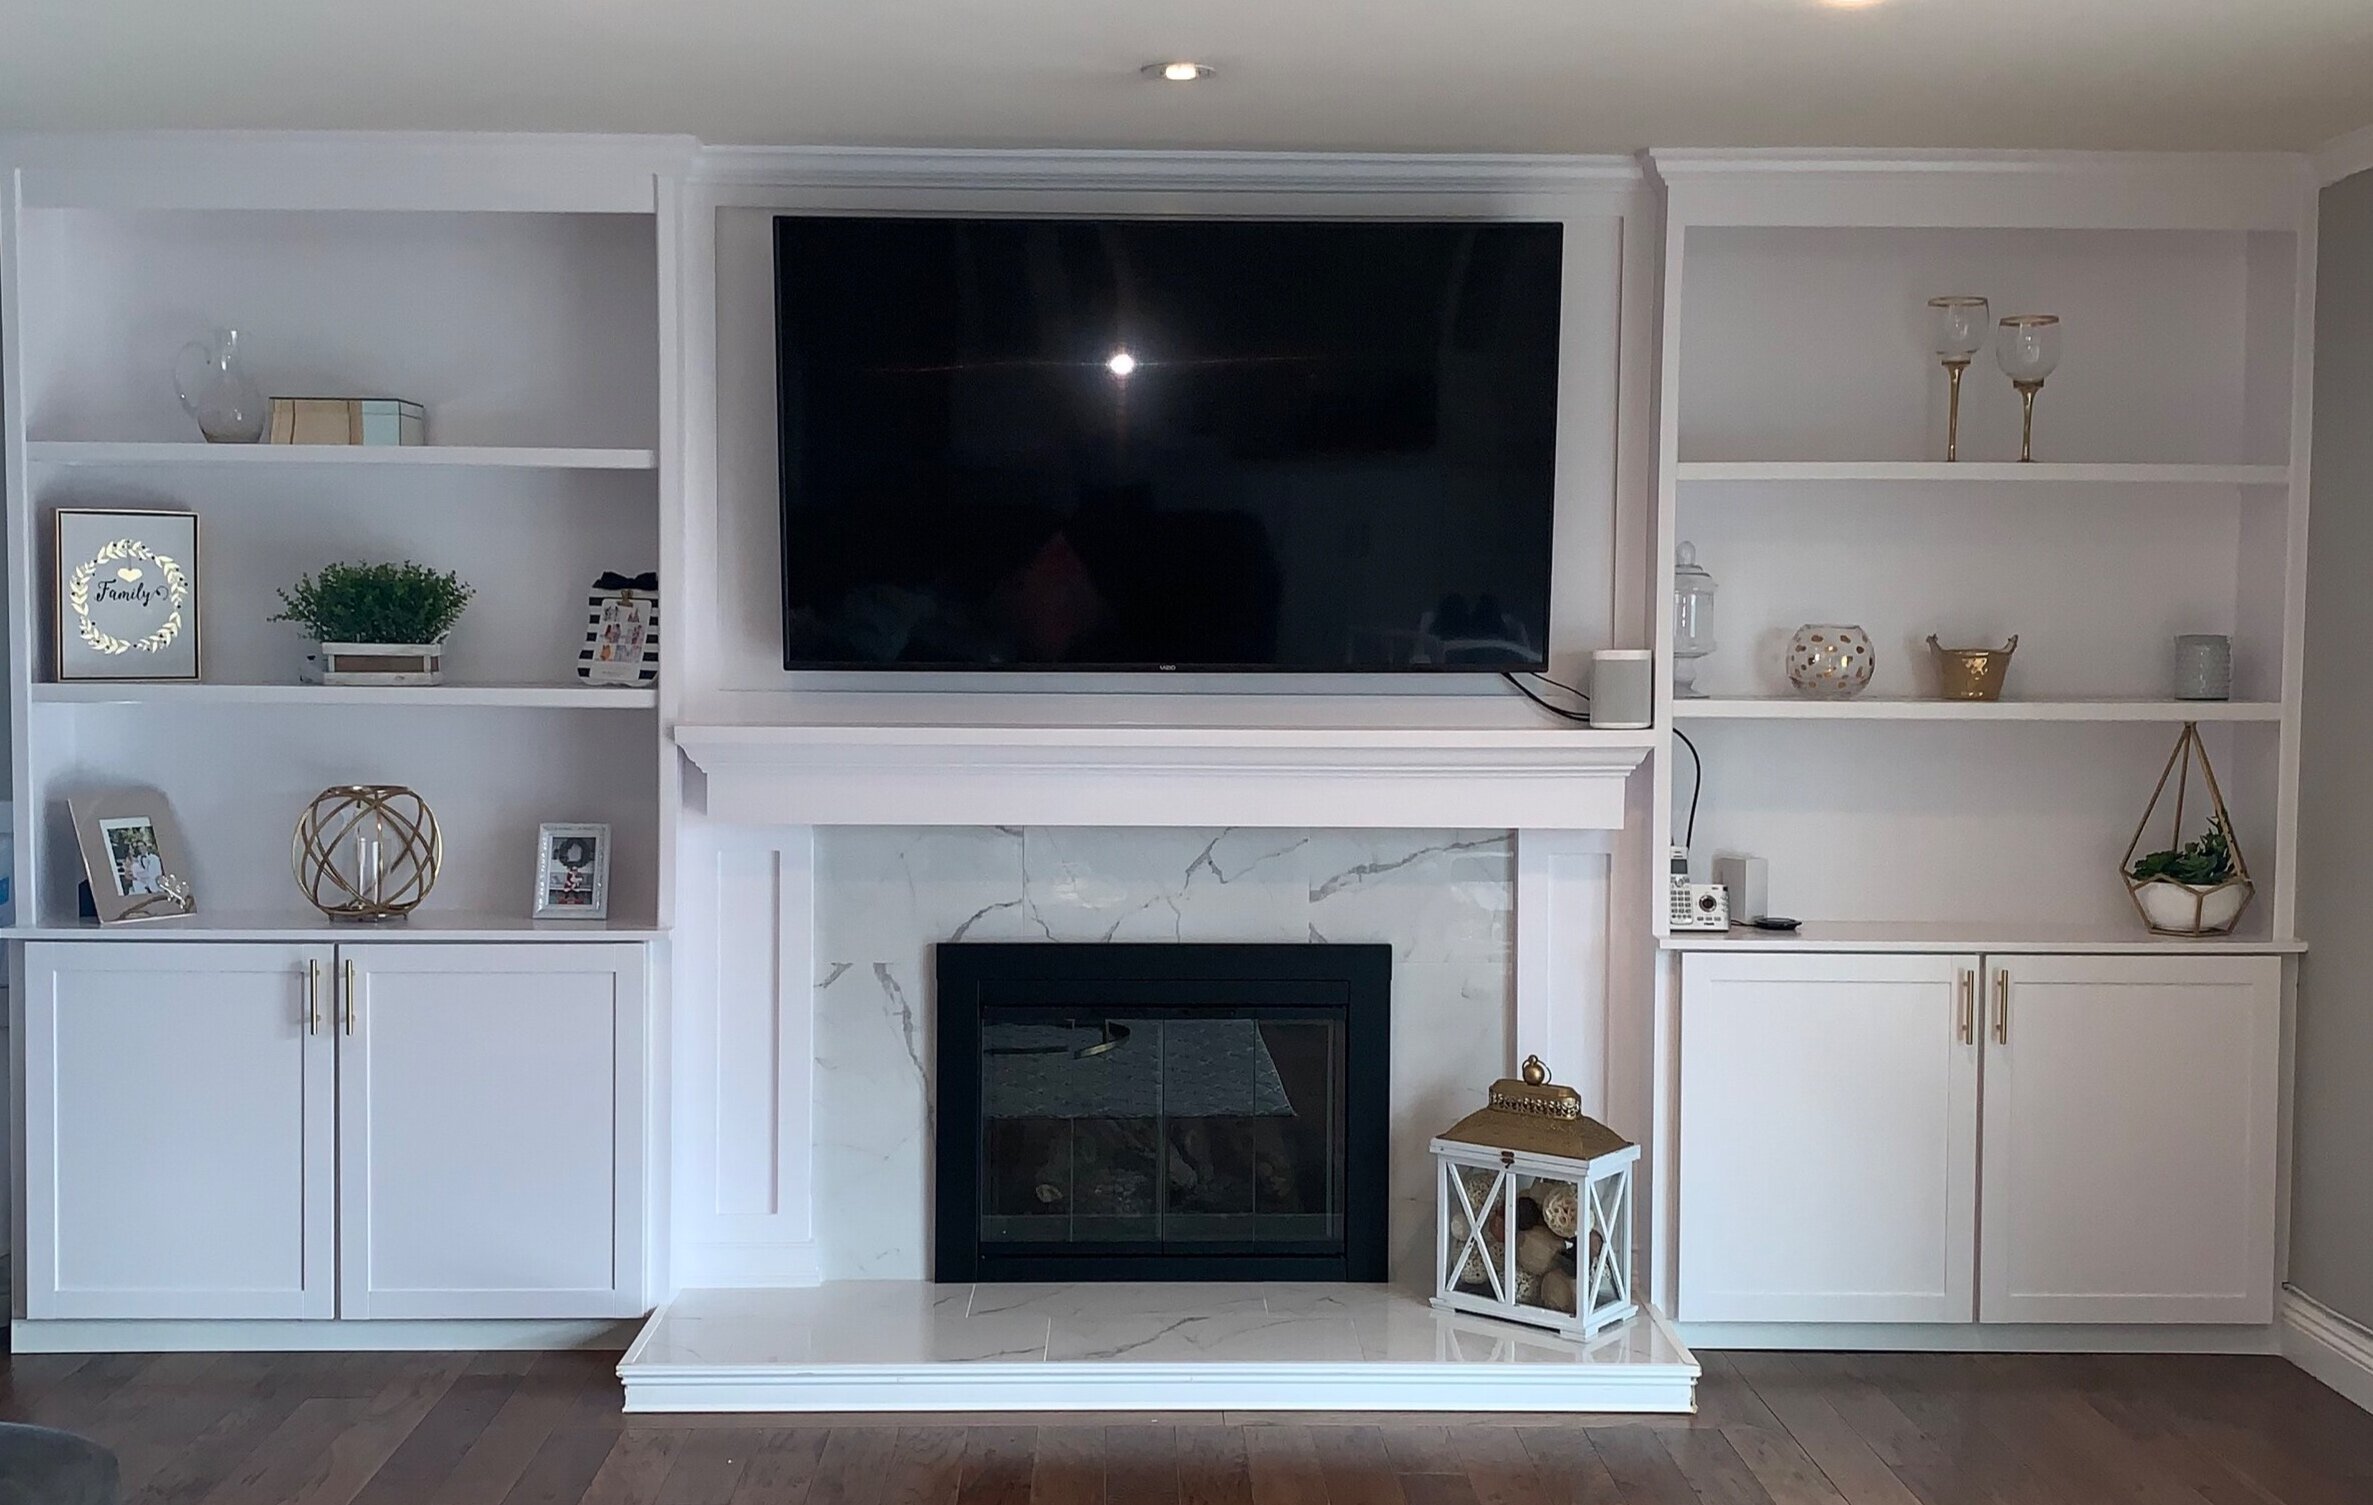 Diy Fireplace Surround And Built Ins, Diy Bookshelves On Each Side Of Fireplace